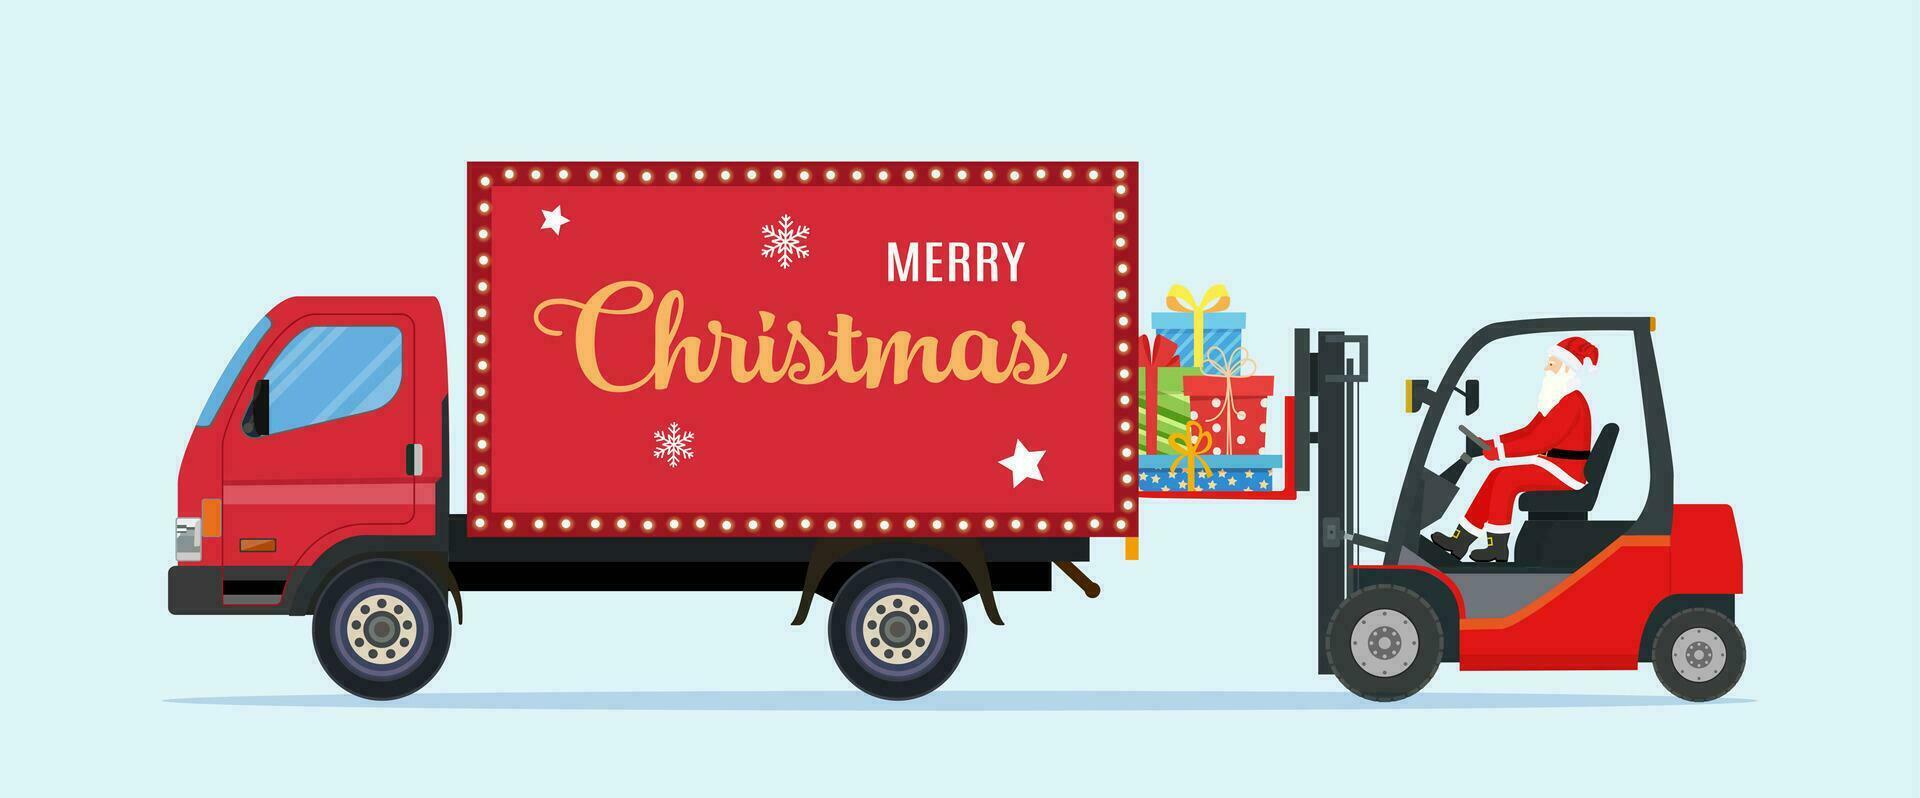 Santa Claus in Red Forklift Loaded with Pile of Gift Boxes and Truck. Christmas Presents Delivery and Shipping. Merry Christmas Holiday. New Year and Xmas. Vector illustration in flat style